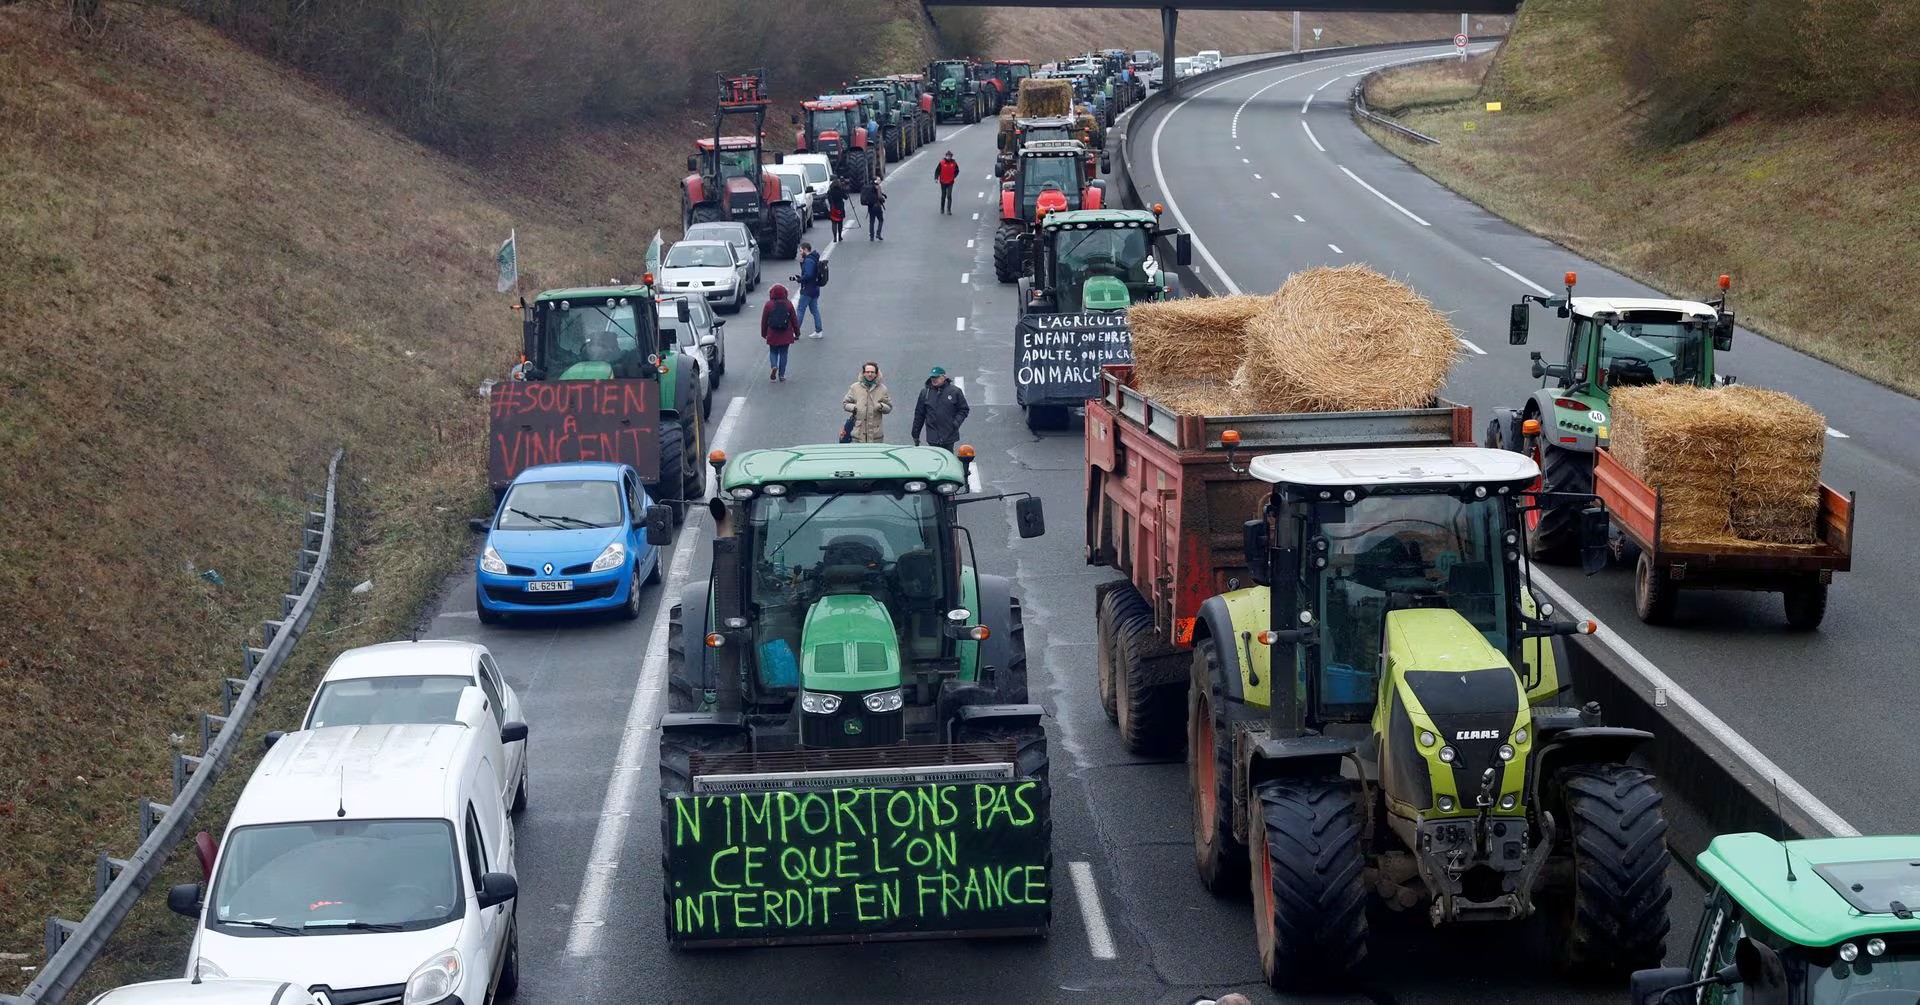 French farmers driving their tractors on the road during the protest